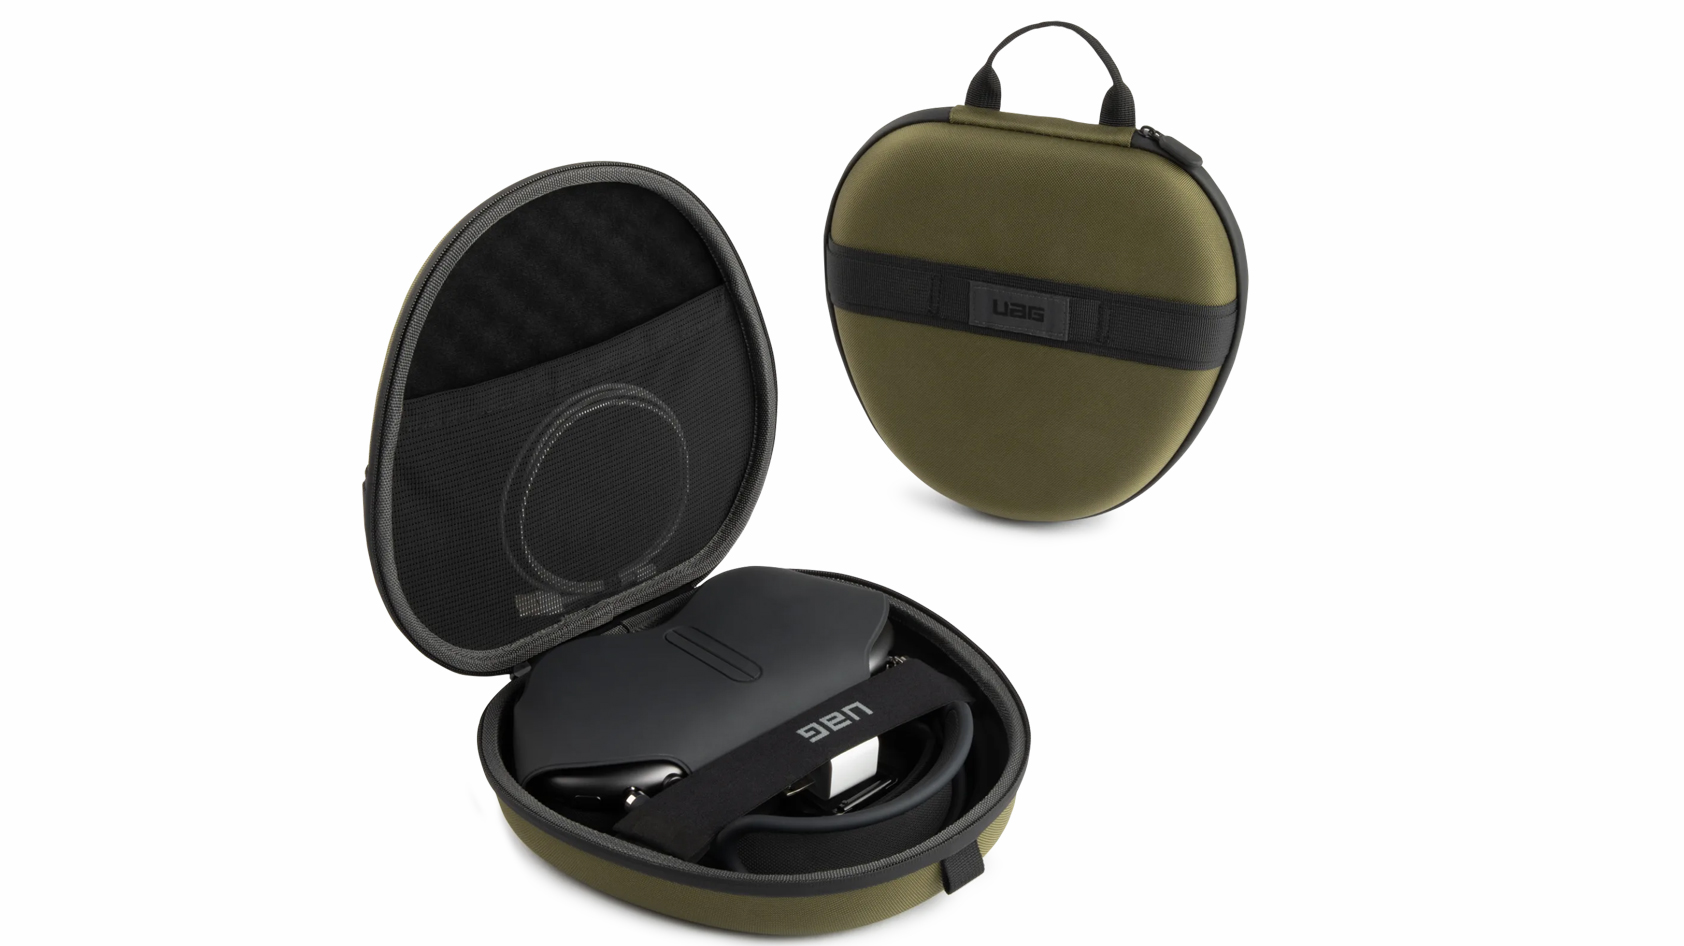 Product shot of the Urban Armor Gear Ration case for Apple AirPods Max shows the case closed and open with headphones and accessories on a white background.